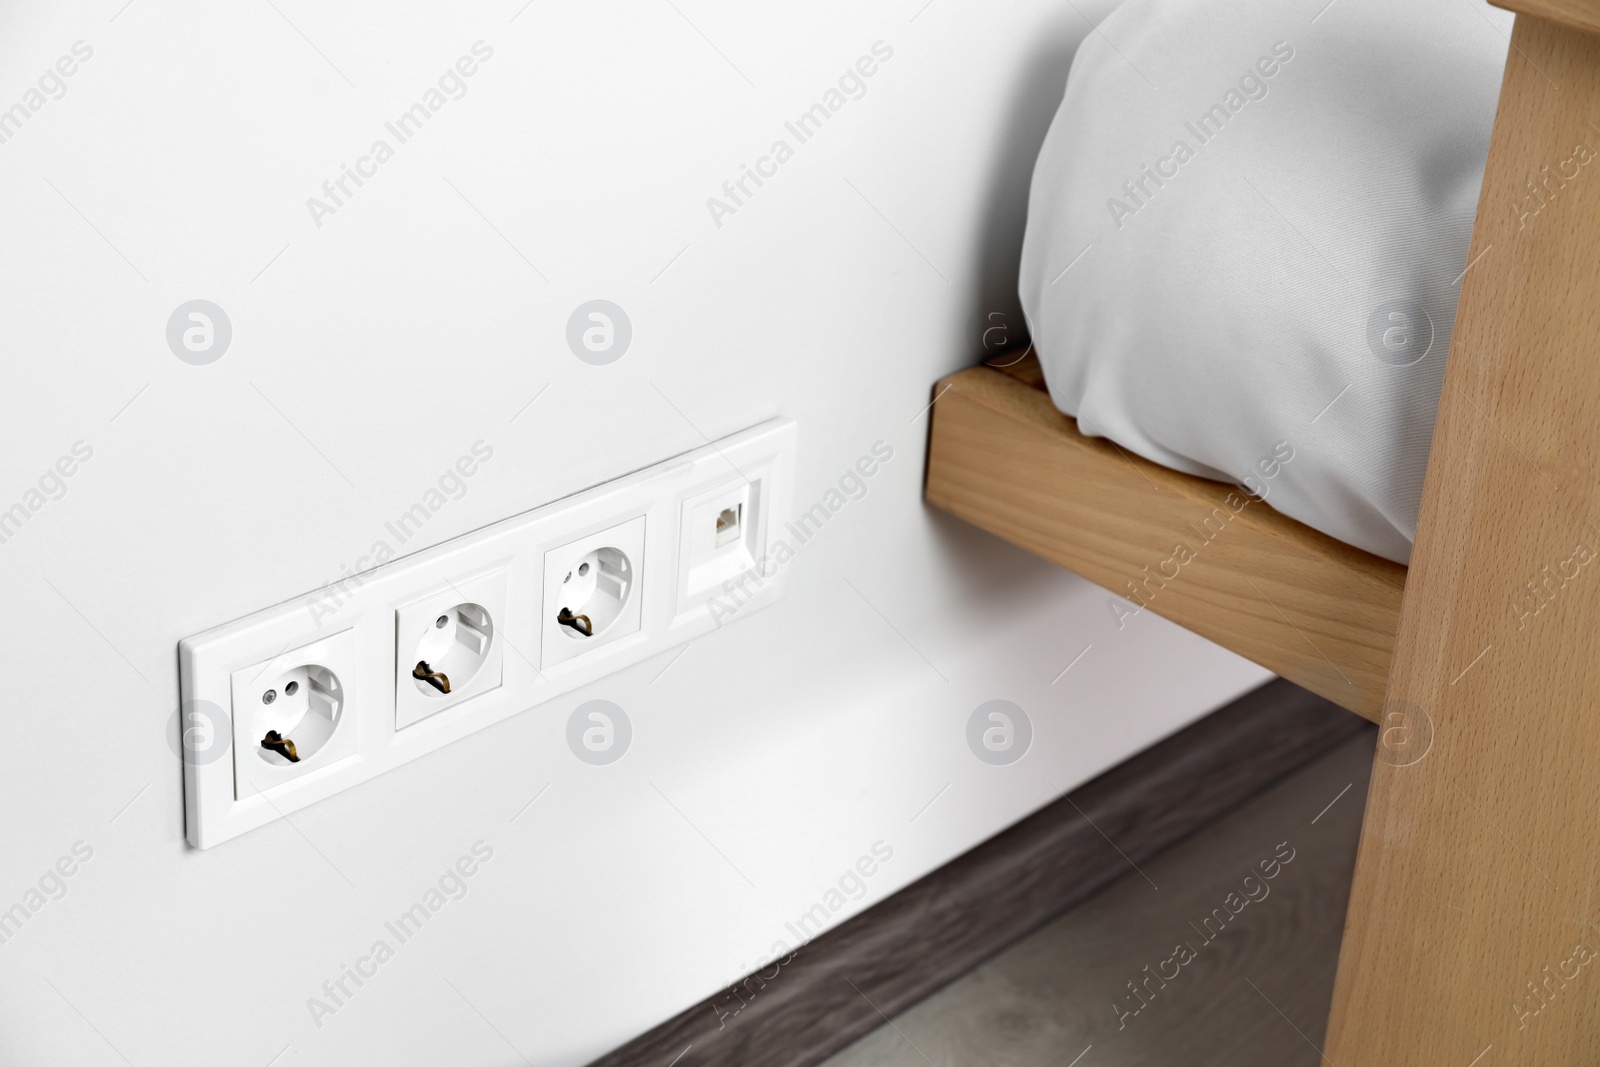 Photo of Power sockets on white wall indoors. Electrical supply